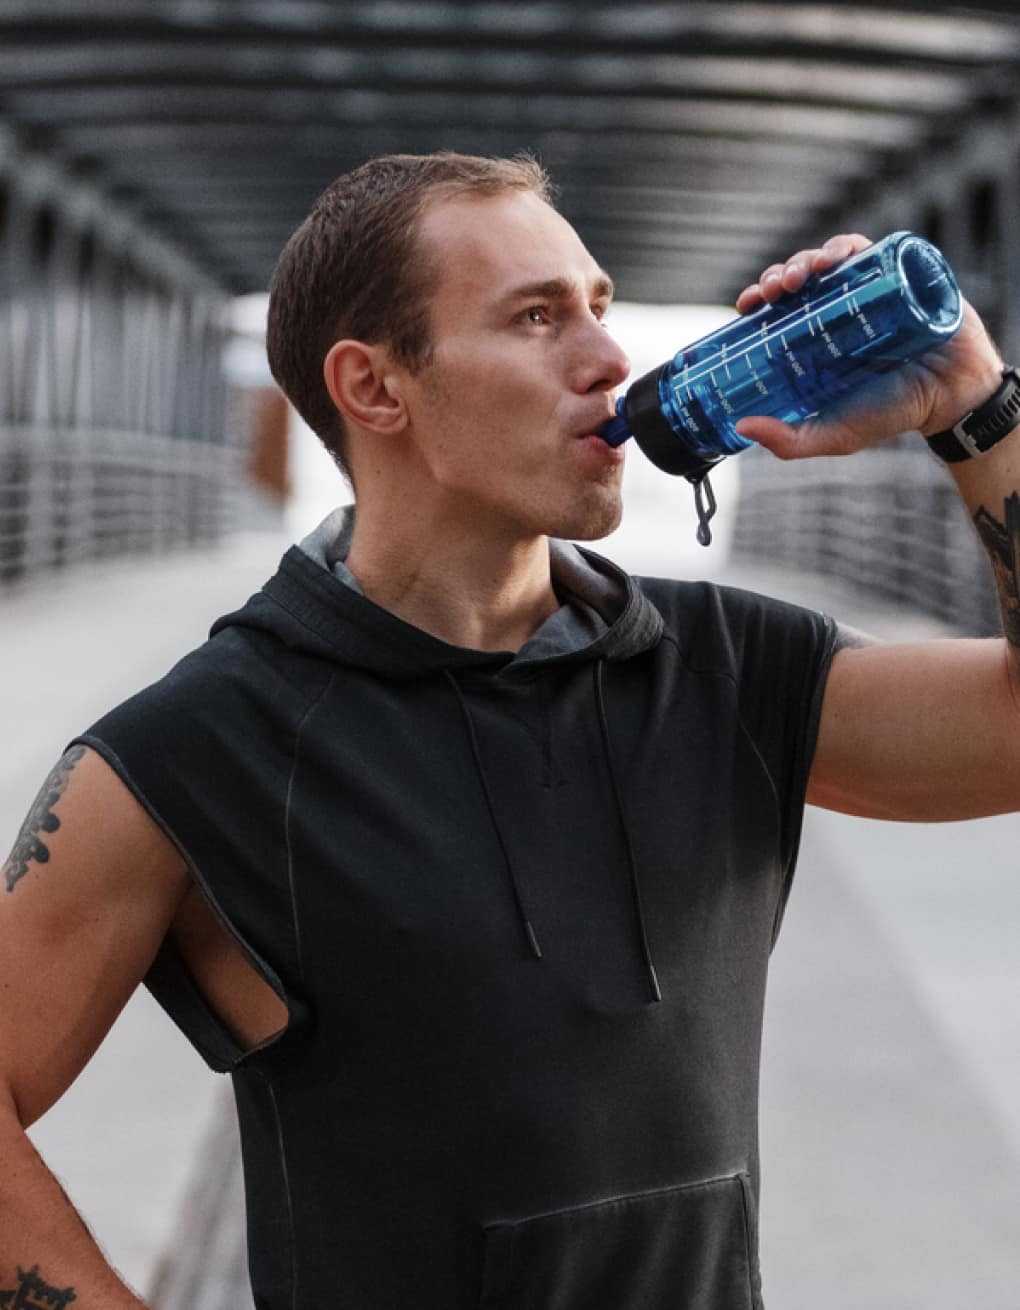 Man hydrating and drinking from a water bottle outside on bridge